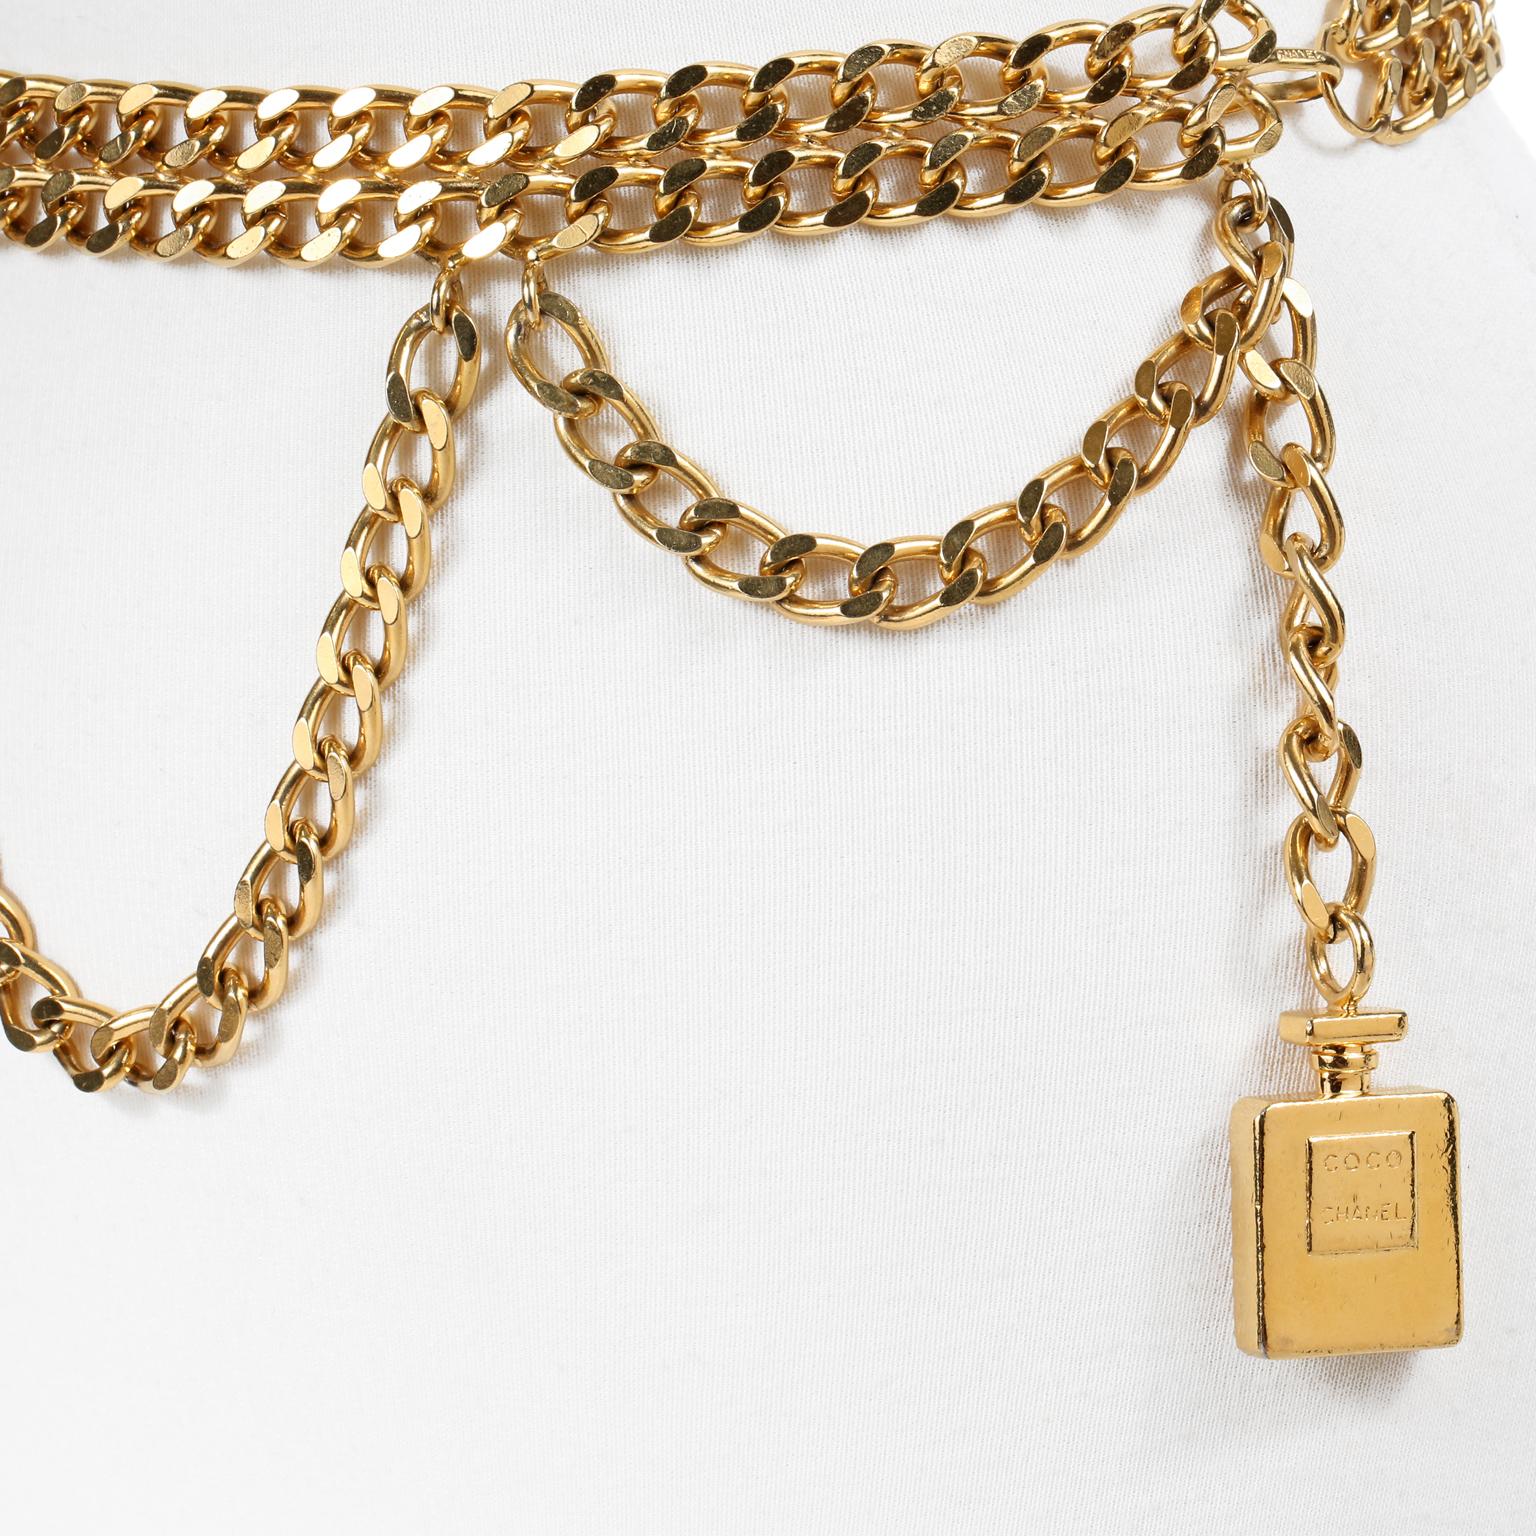 This authentic Chanel Perfume Bottle Triple Chain Belt is in beautiful condition.  Substantial double layer of gold tone linked chain with a third draped chain.  Gold COCO CHANEL perfume bottle dangles from the end.  Hook closure.  Measurements:  